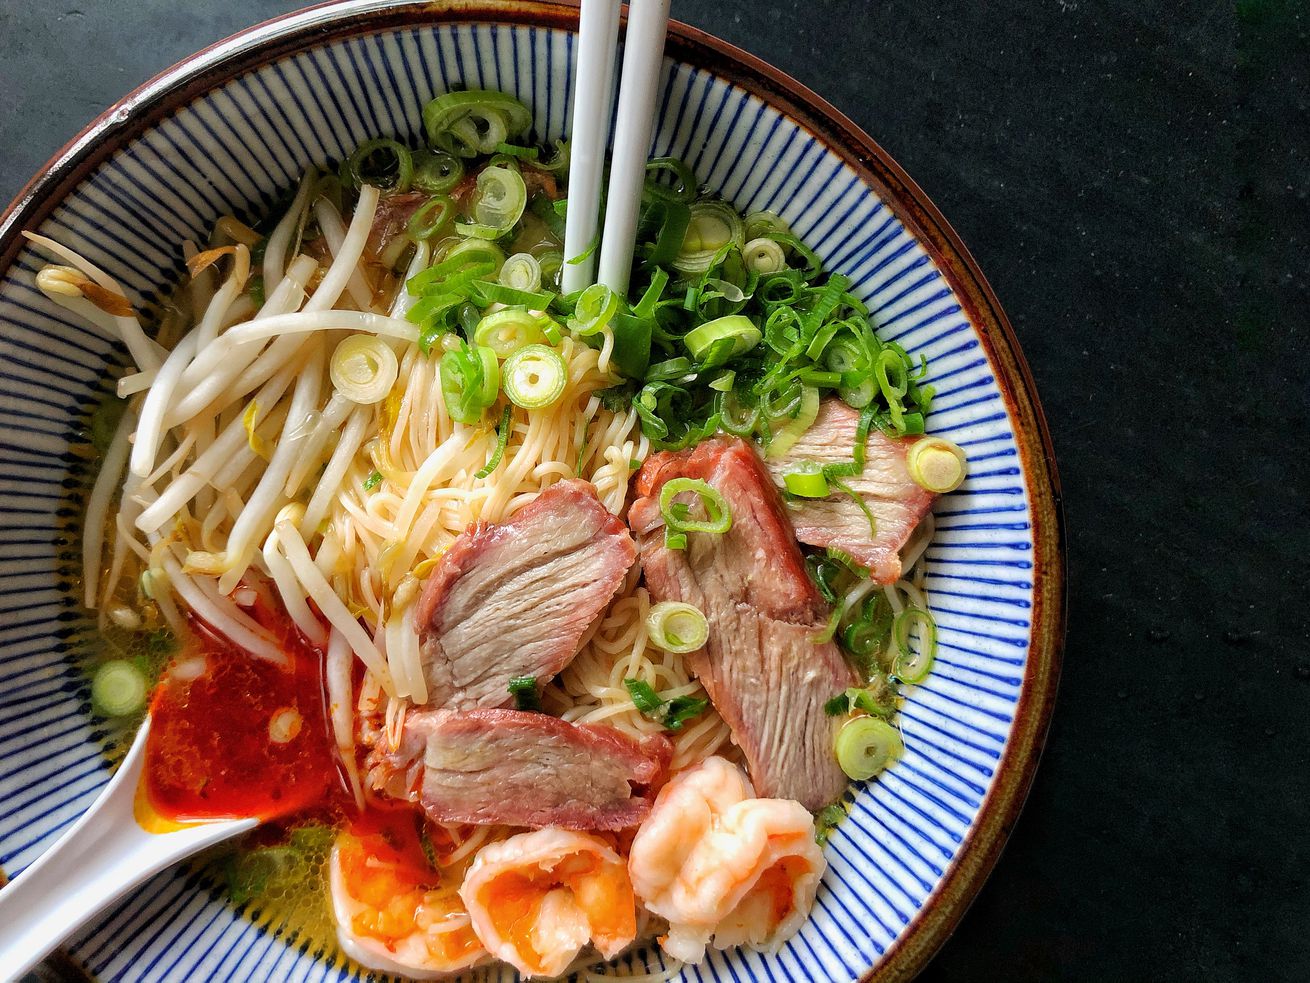 Plaza St-Hubert’s Incoming Vietnamese Spot Wants to Bring People Together in a Buzzy Atmosphere